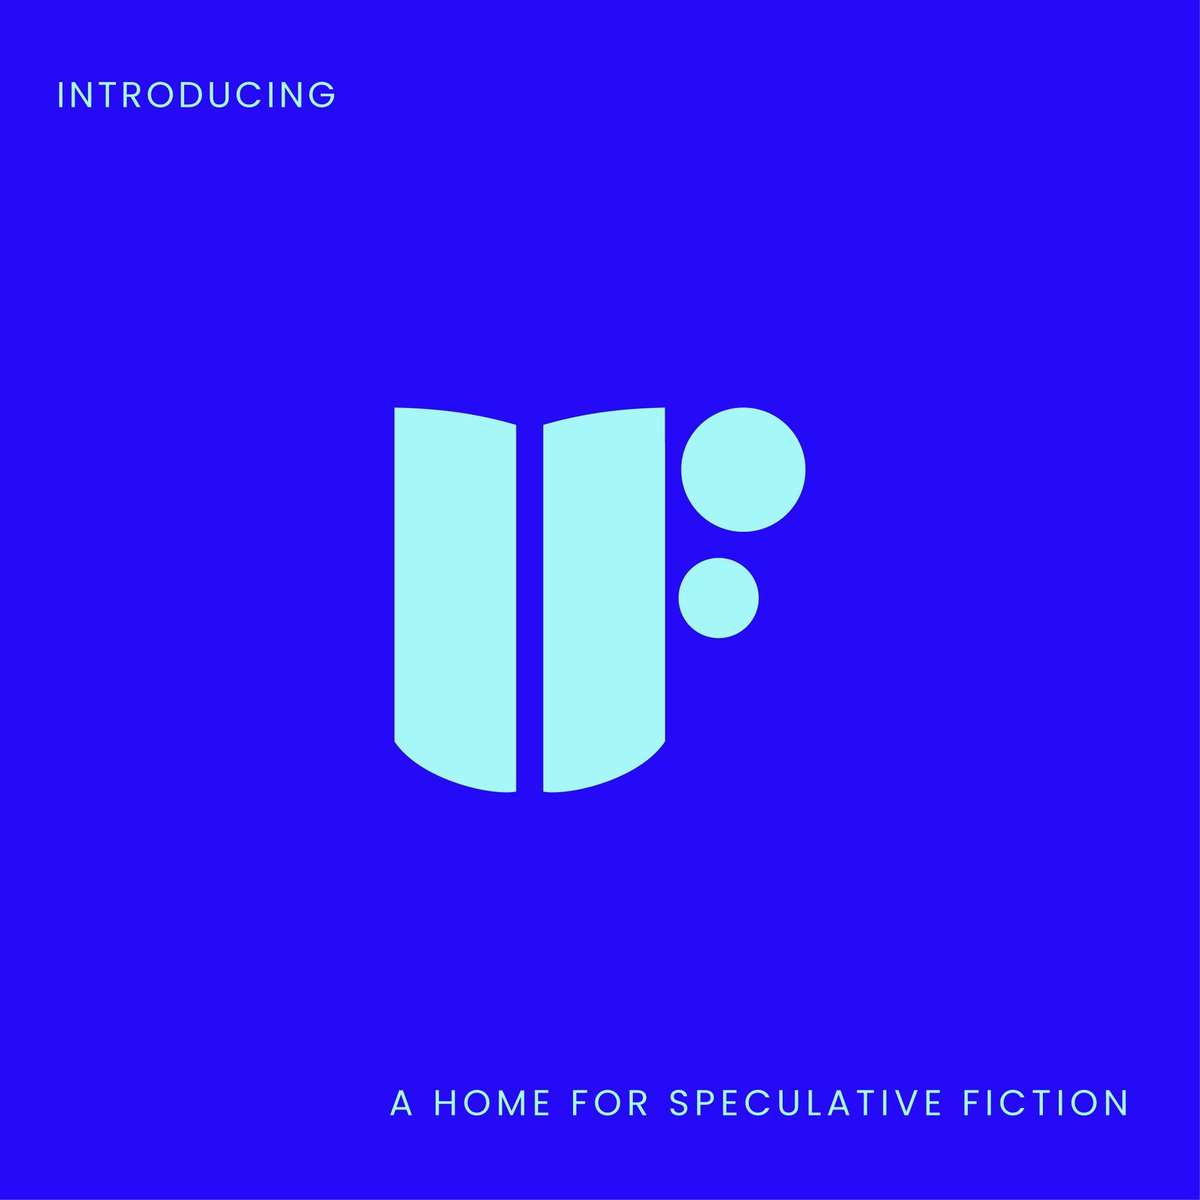 Readers Assemble! We have a big #Friday reveal. #IF #SpeculativeFiction